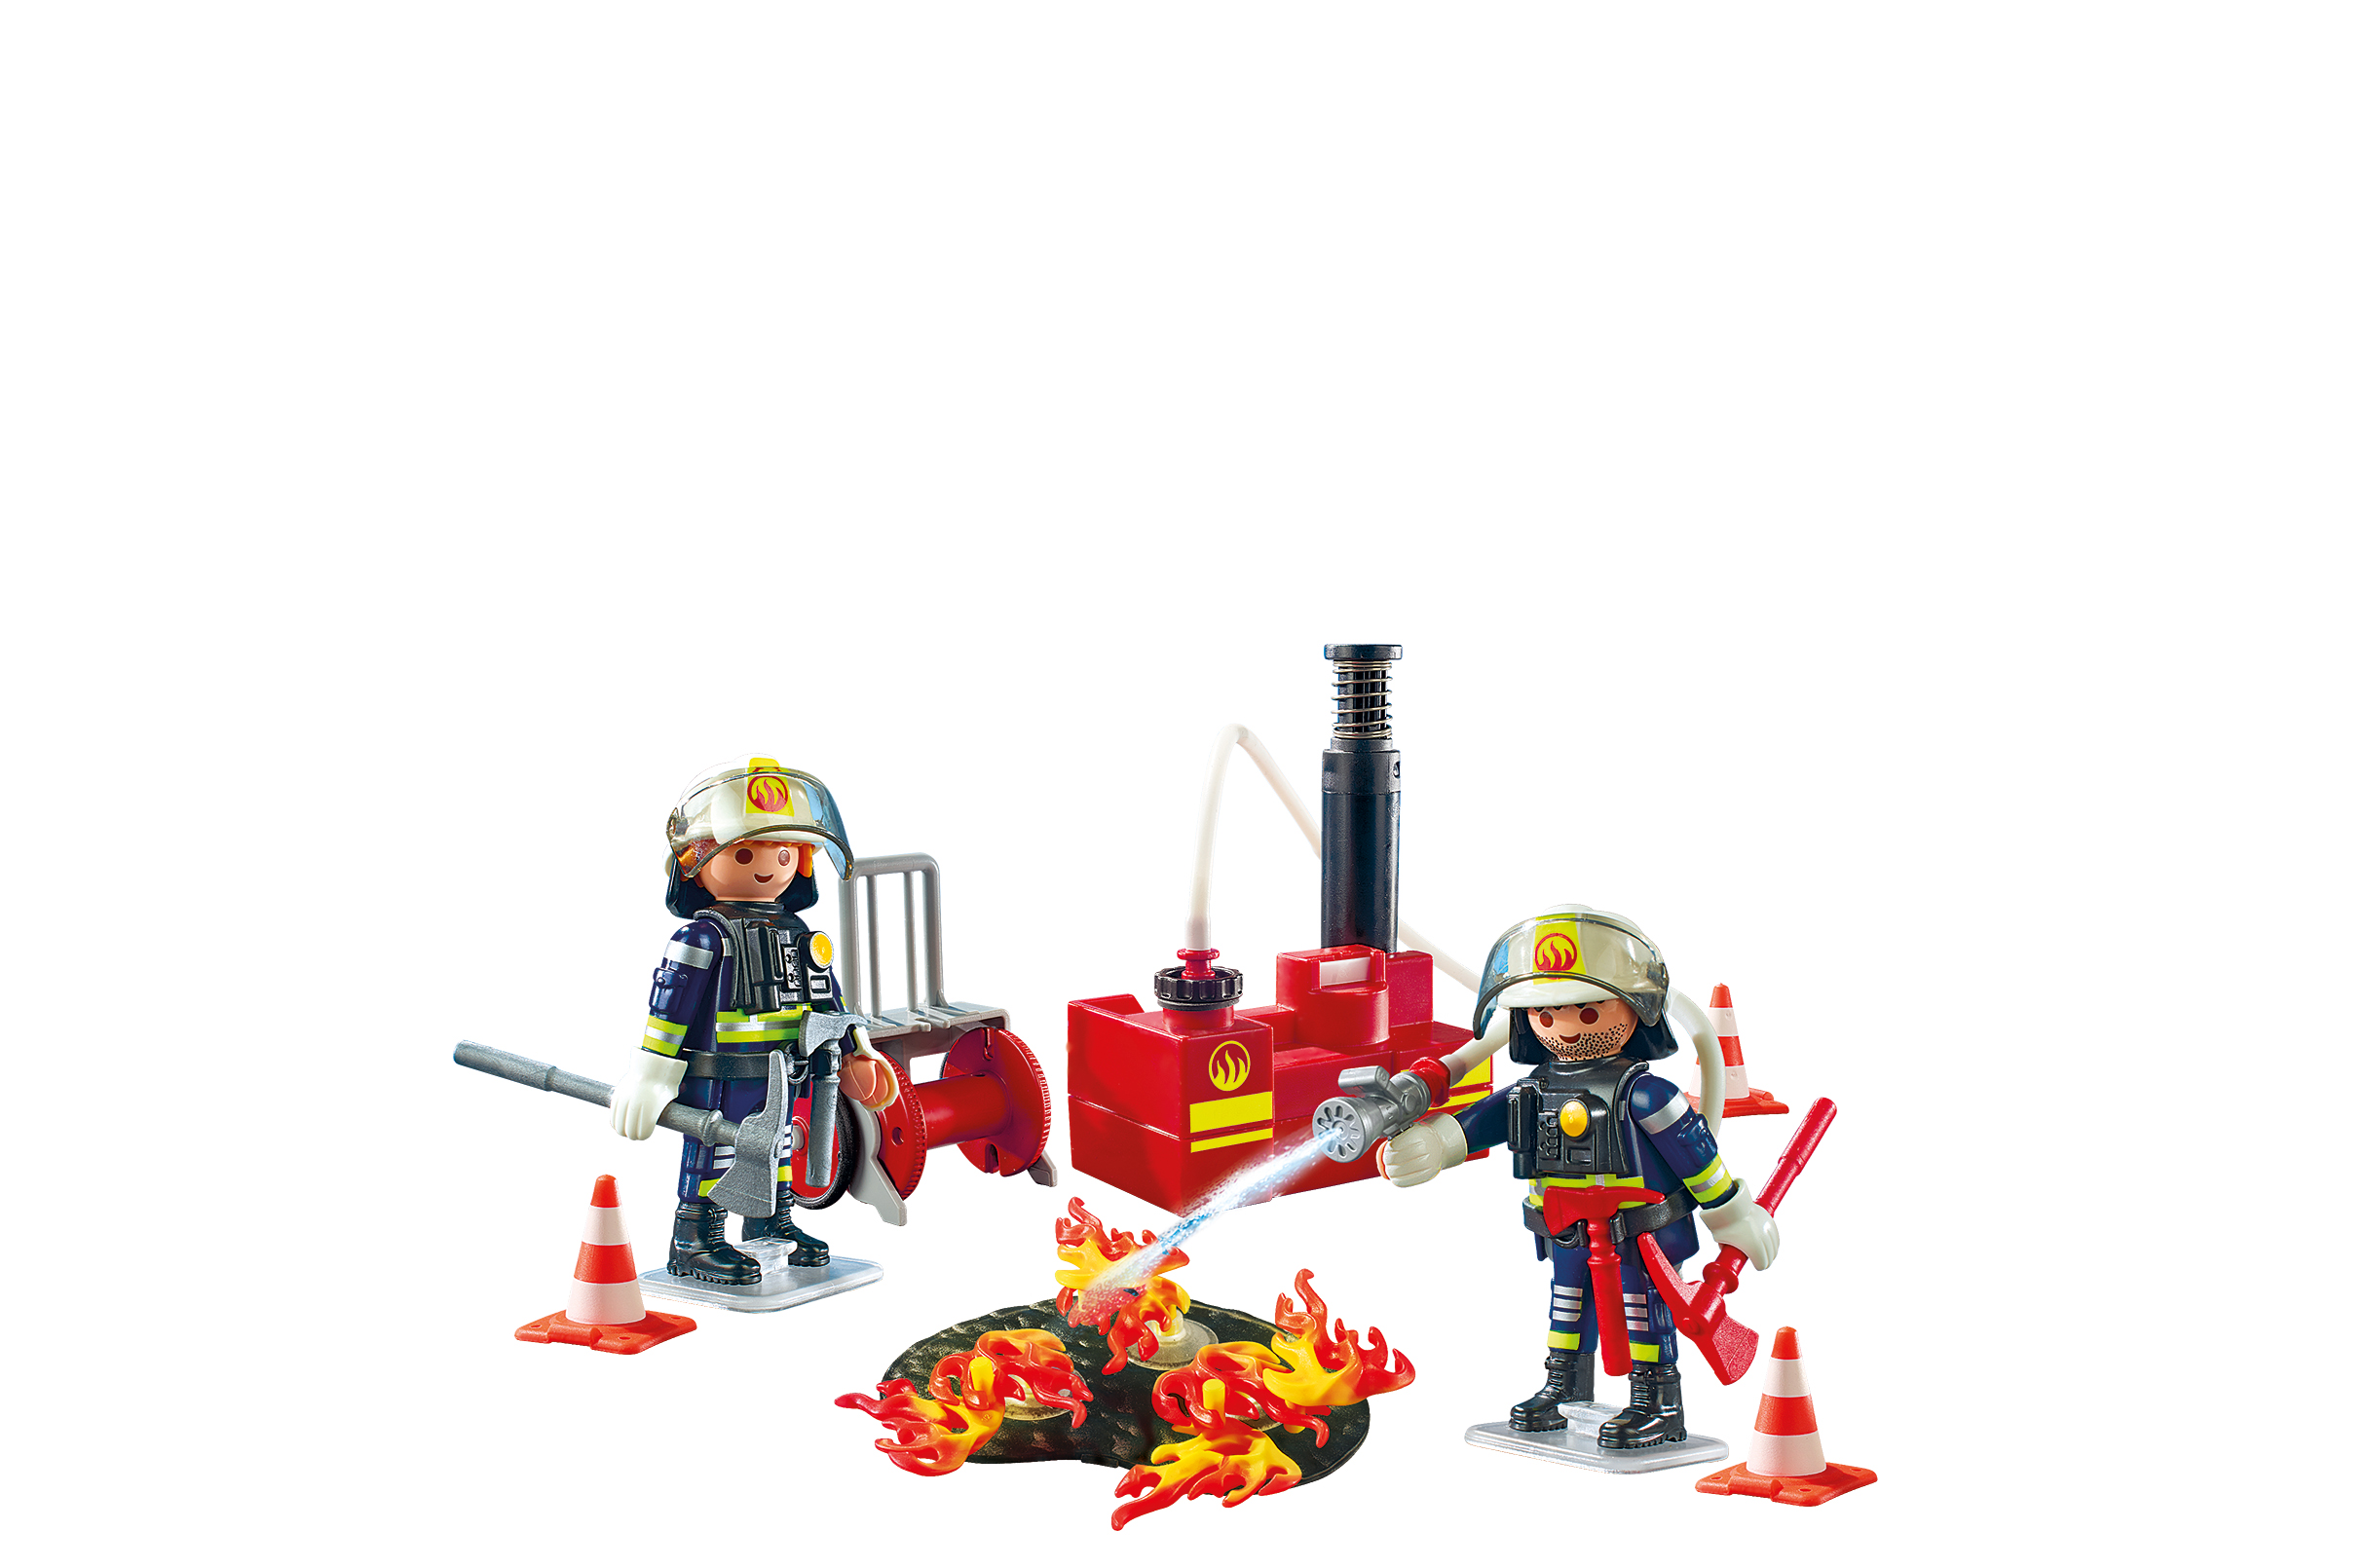 PLAYMOBIL Firefighting Operation with Water Pump - image 2 of 5